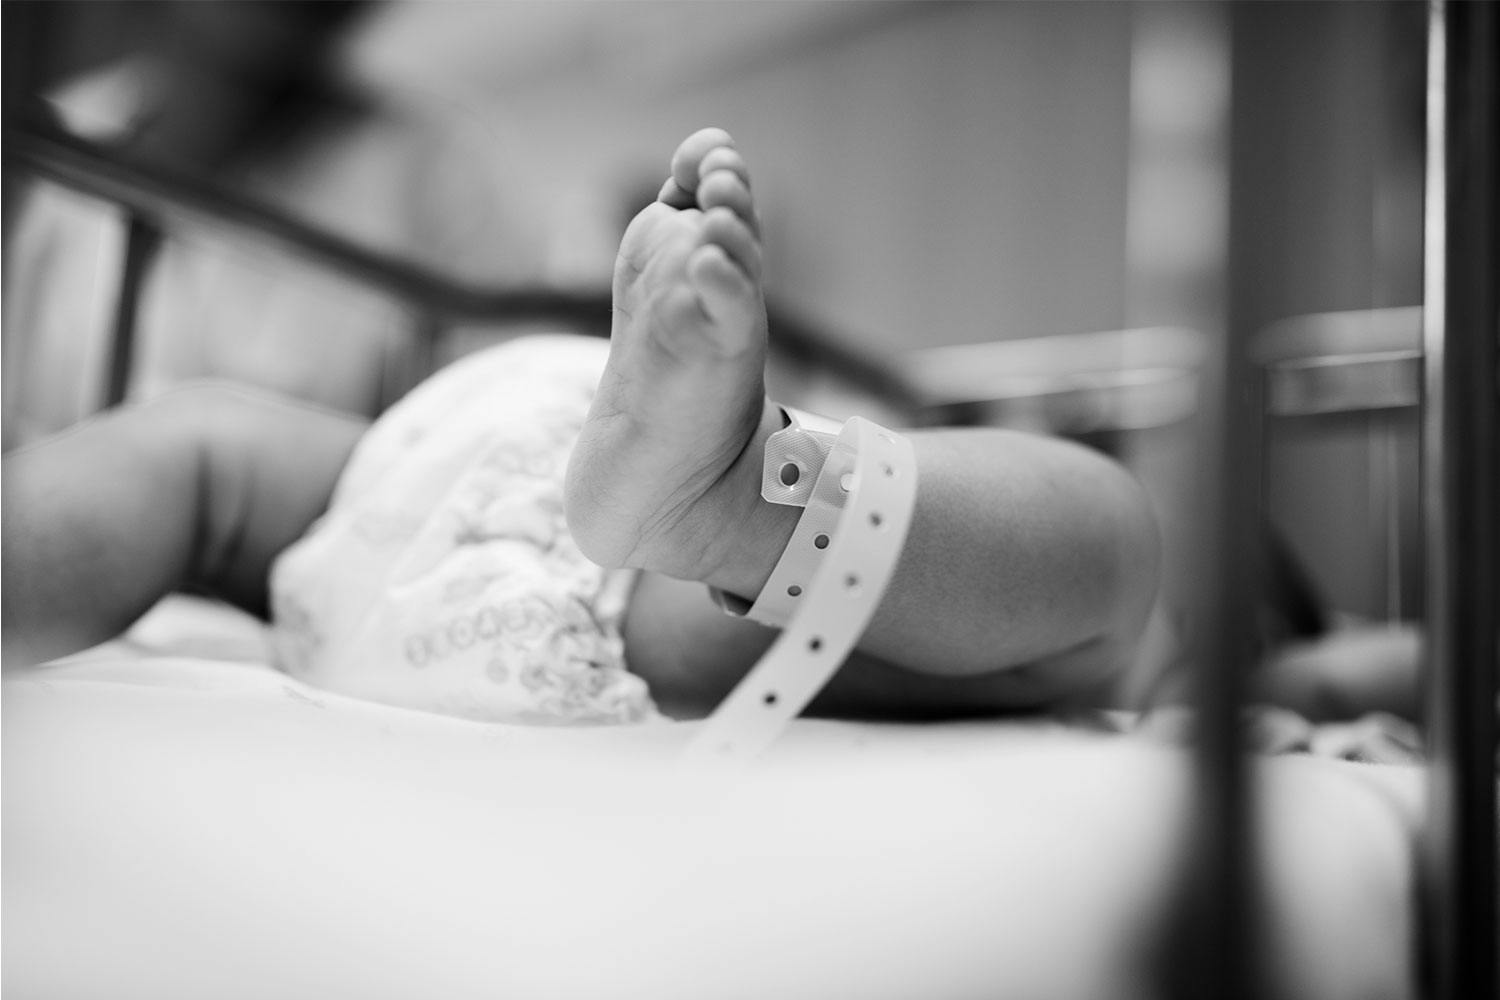 A newborn baby lies in a hospital crib. The baby has a plastic snap-button fastened anklet on their left leg.